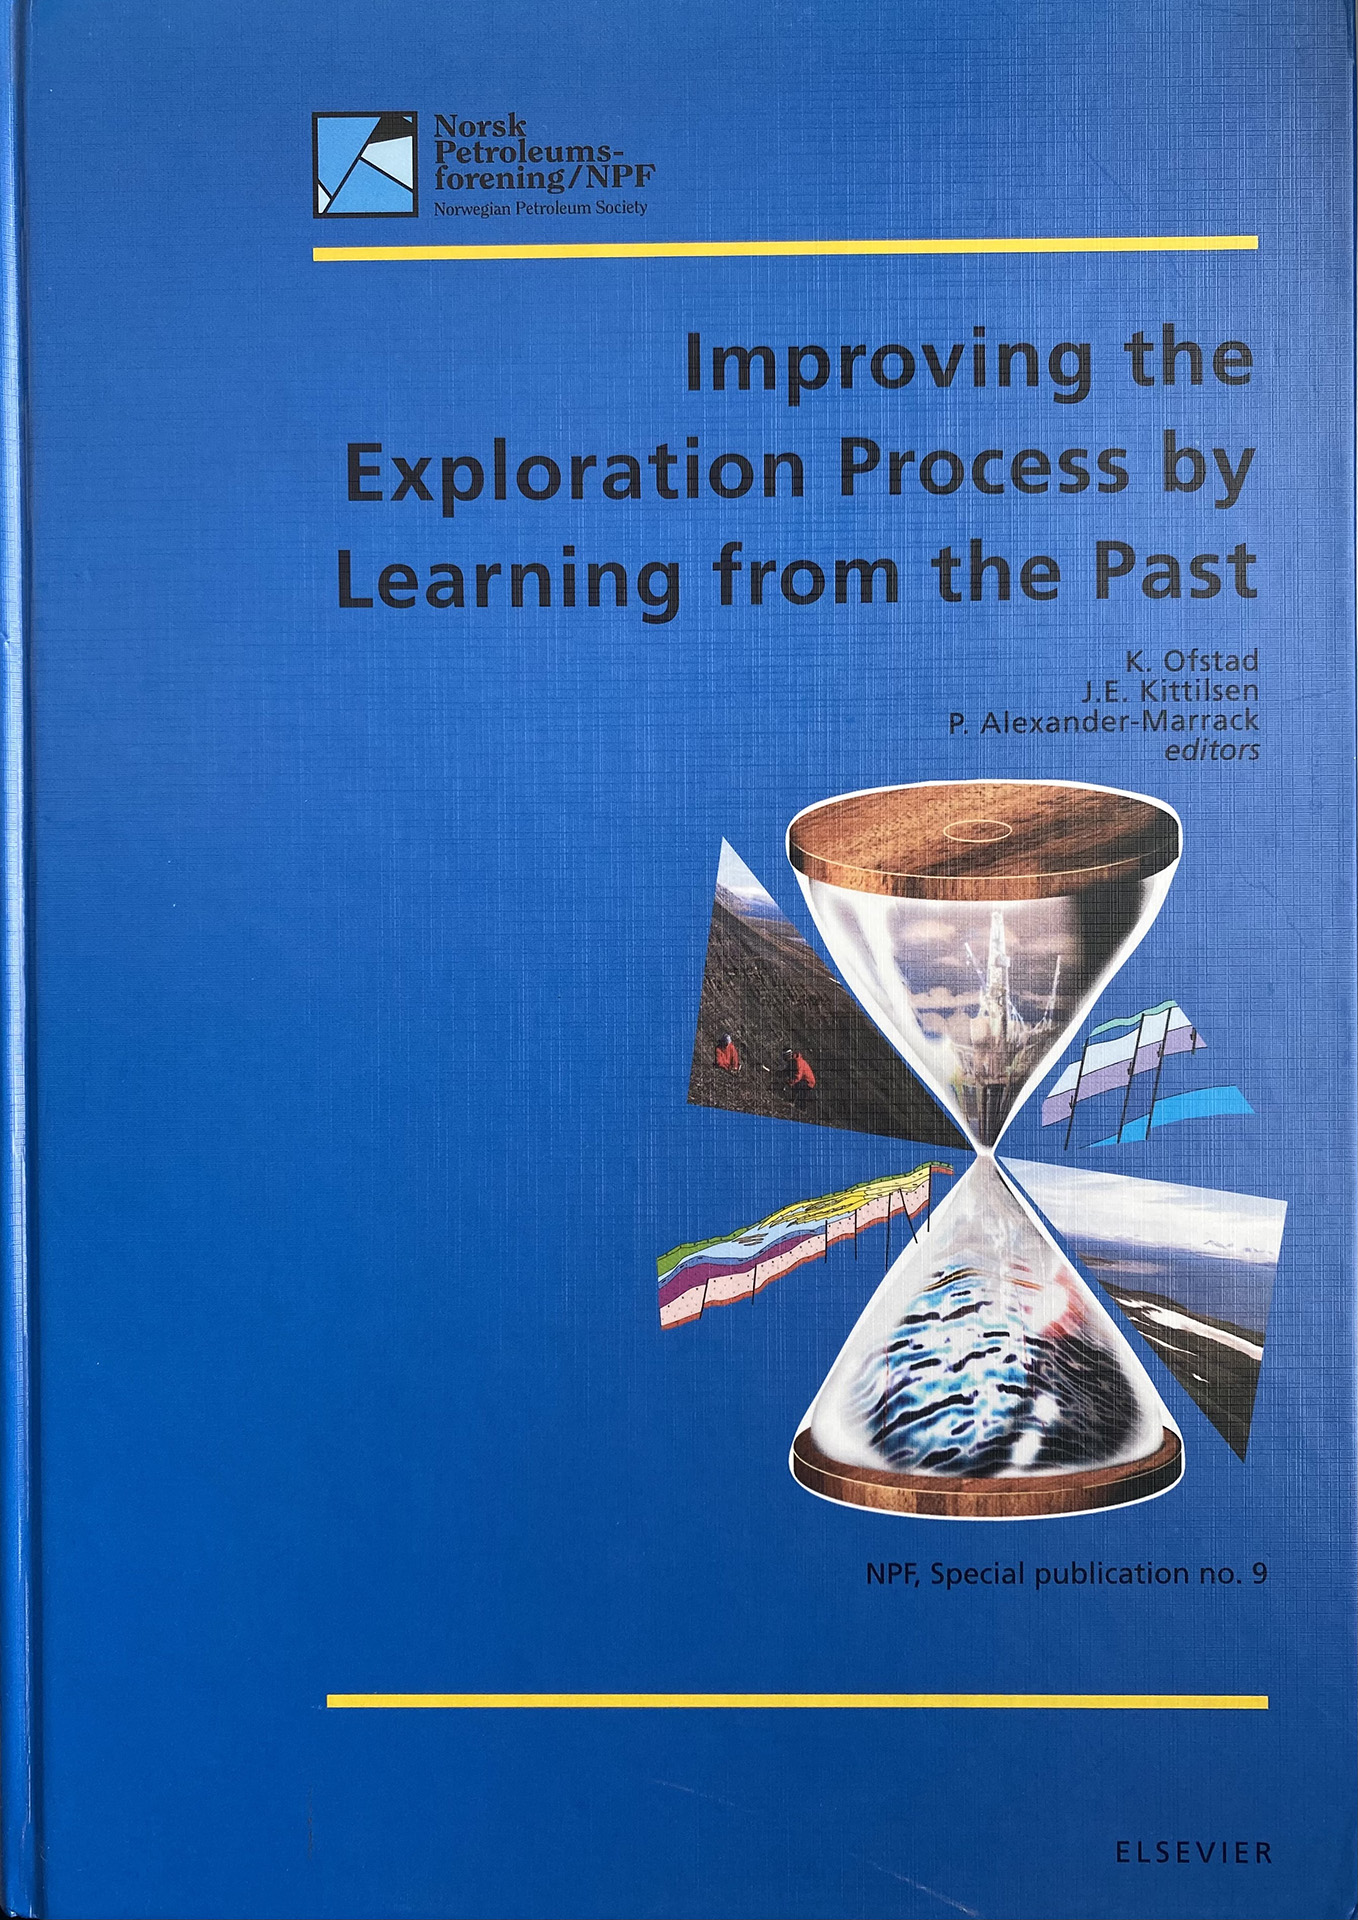 "Improving the Exploration Process by Learning from the Past" (K. Ofstad, J.E. Kittilsen & P. Alexander-Marrack (editors), NPF Special Publication 9, Elsevier, 2000)